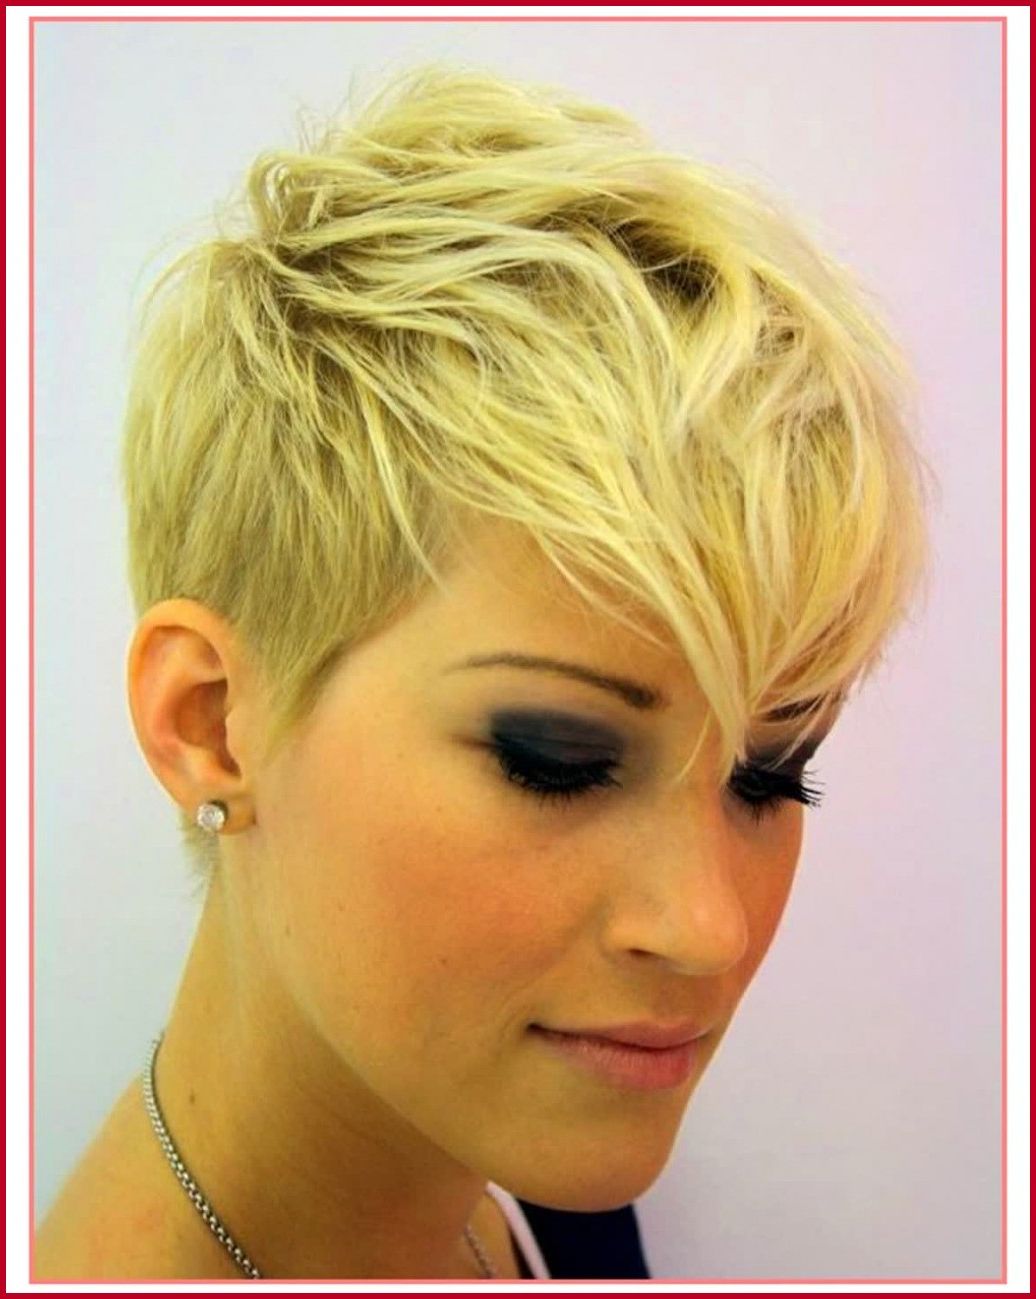 Short Haircuts With Shaved Sides 13565 The Haircuts Womens Short With Short Hairstyles With Shaved Sides (View 18 of 25)